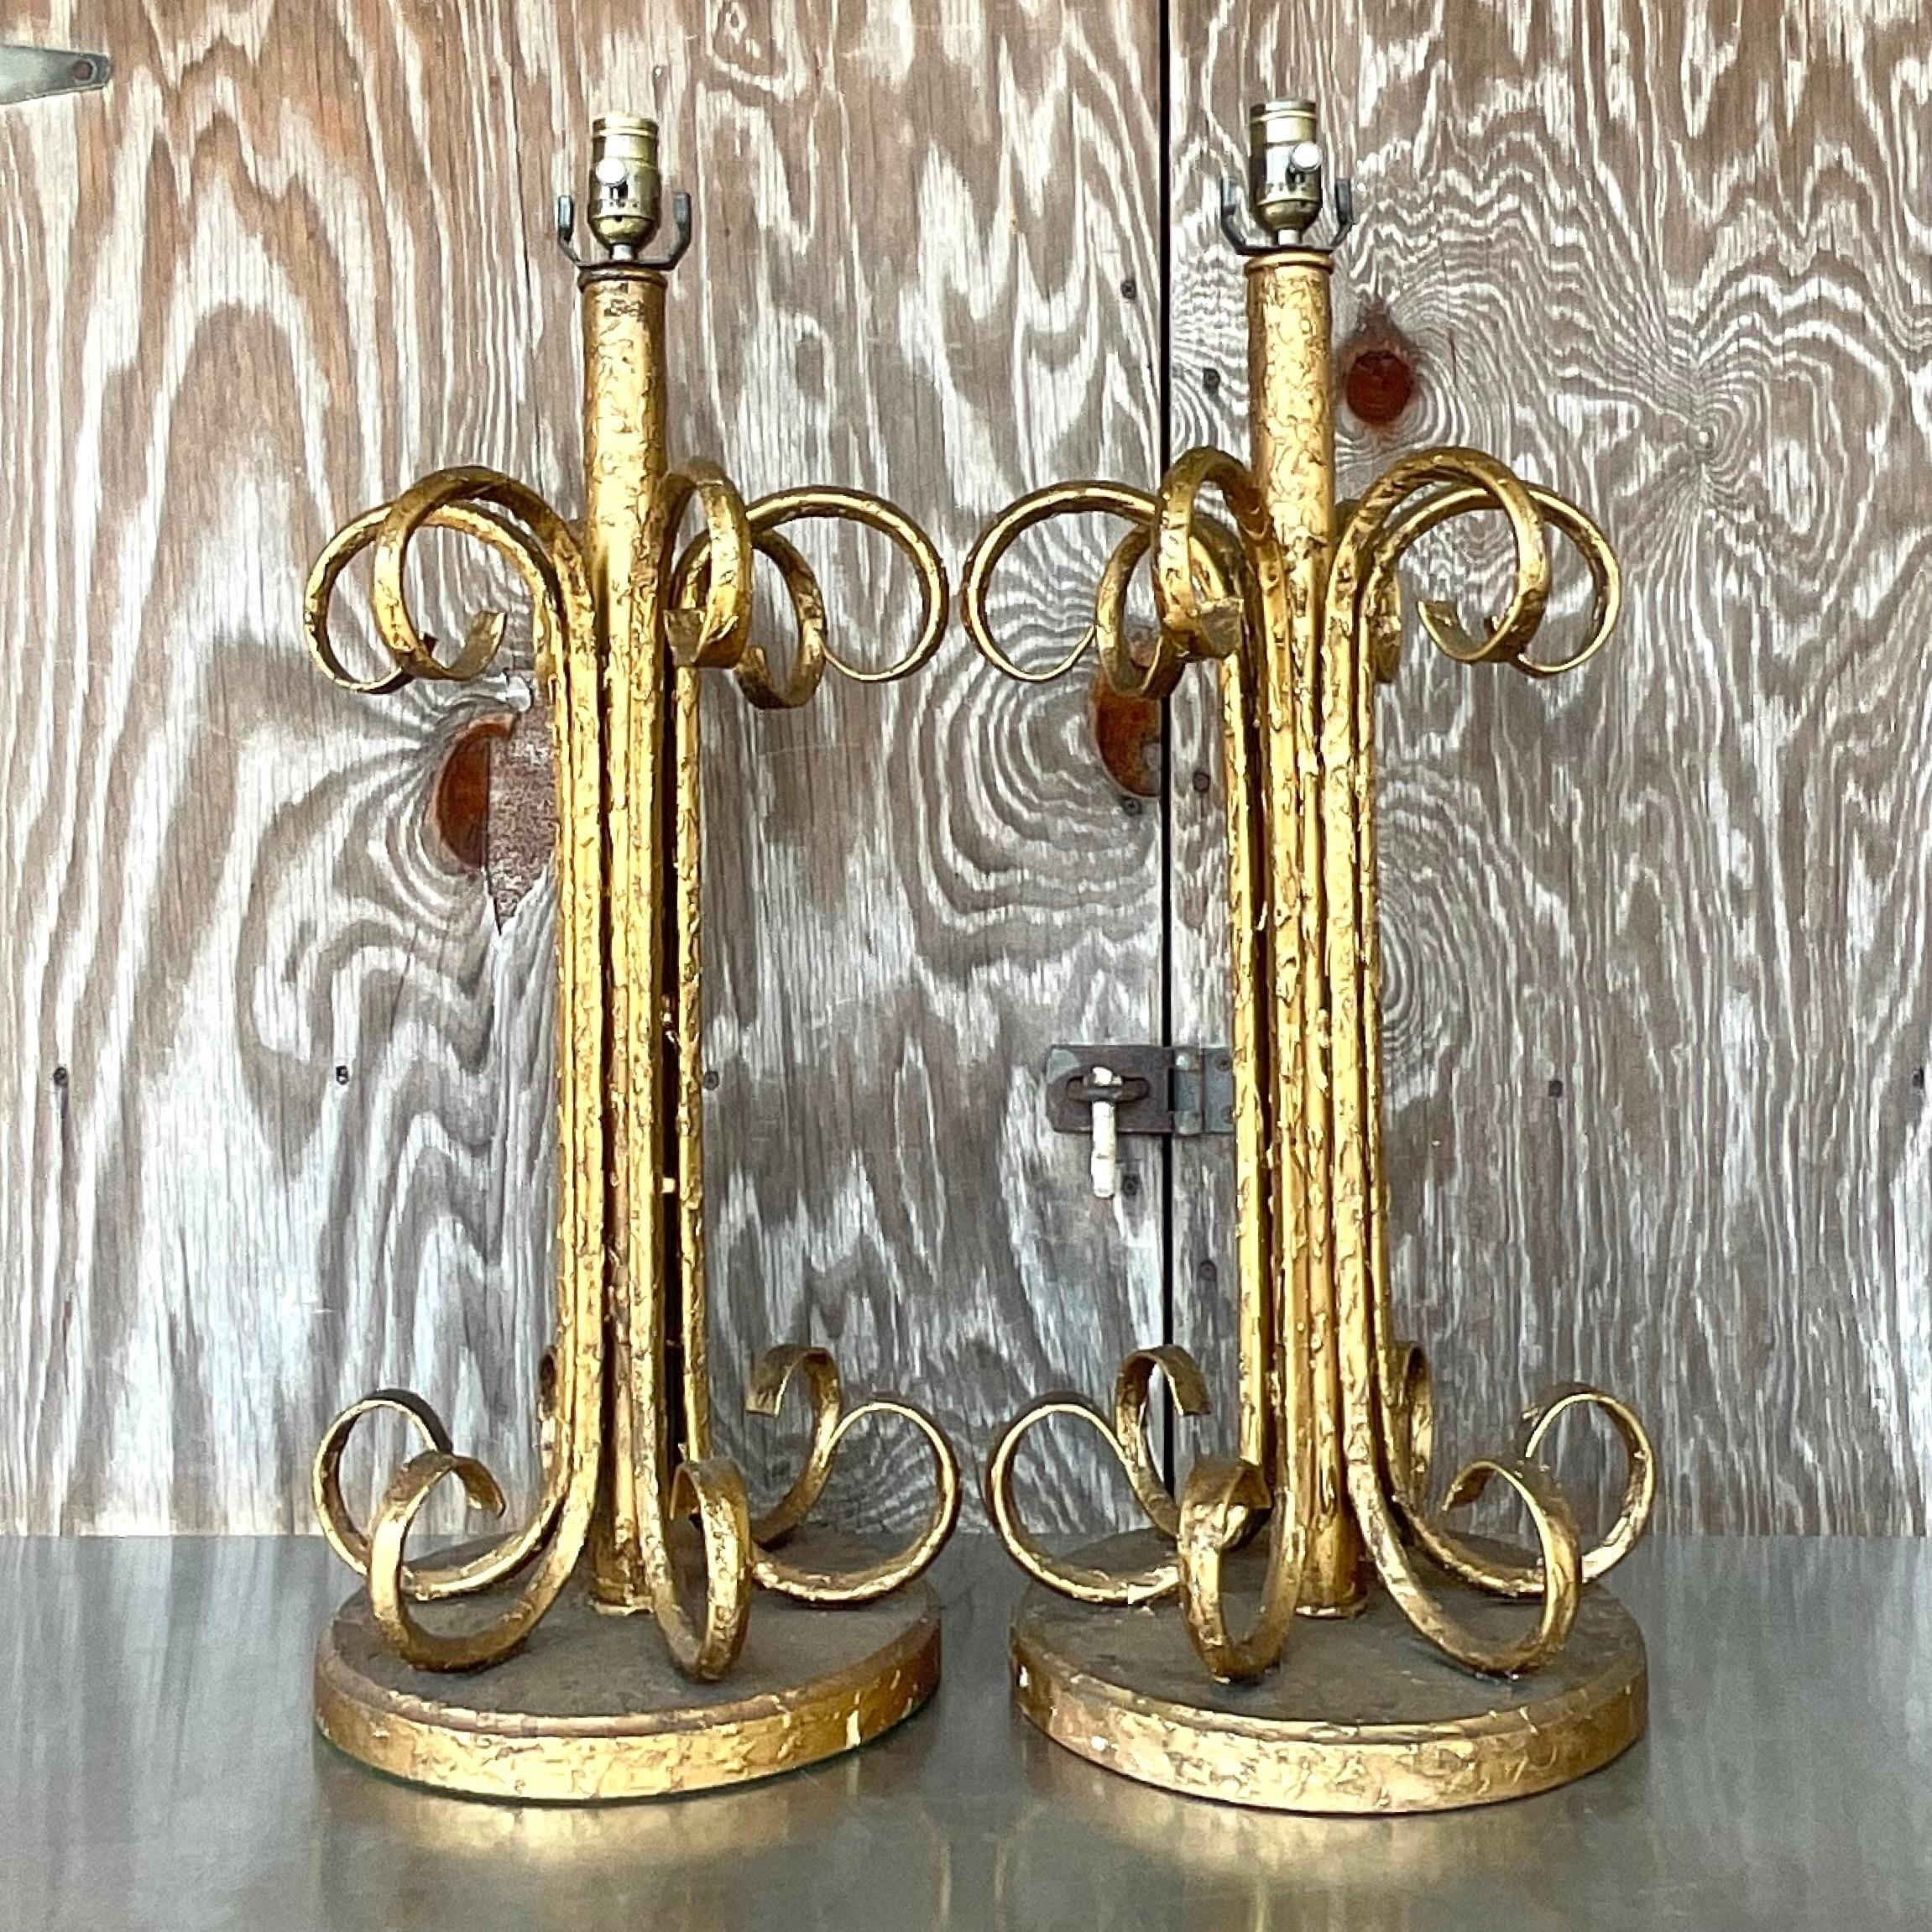 Vintage Boho Gilt Scroll Lamps - a Pair In Good Condition For Sale In west palm beach, FL